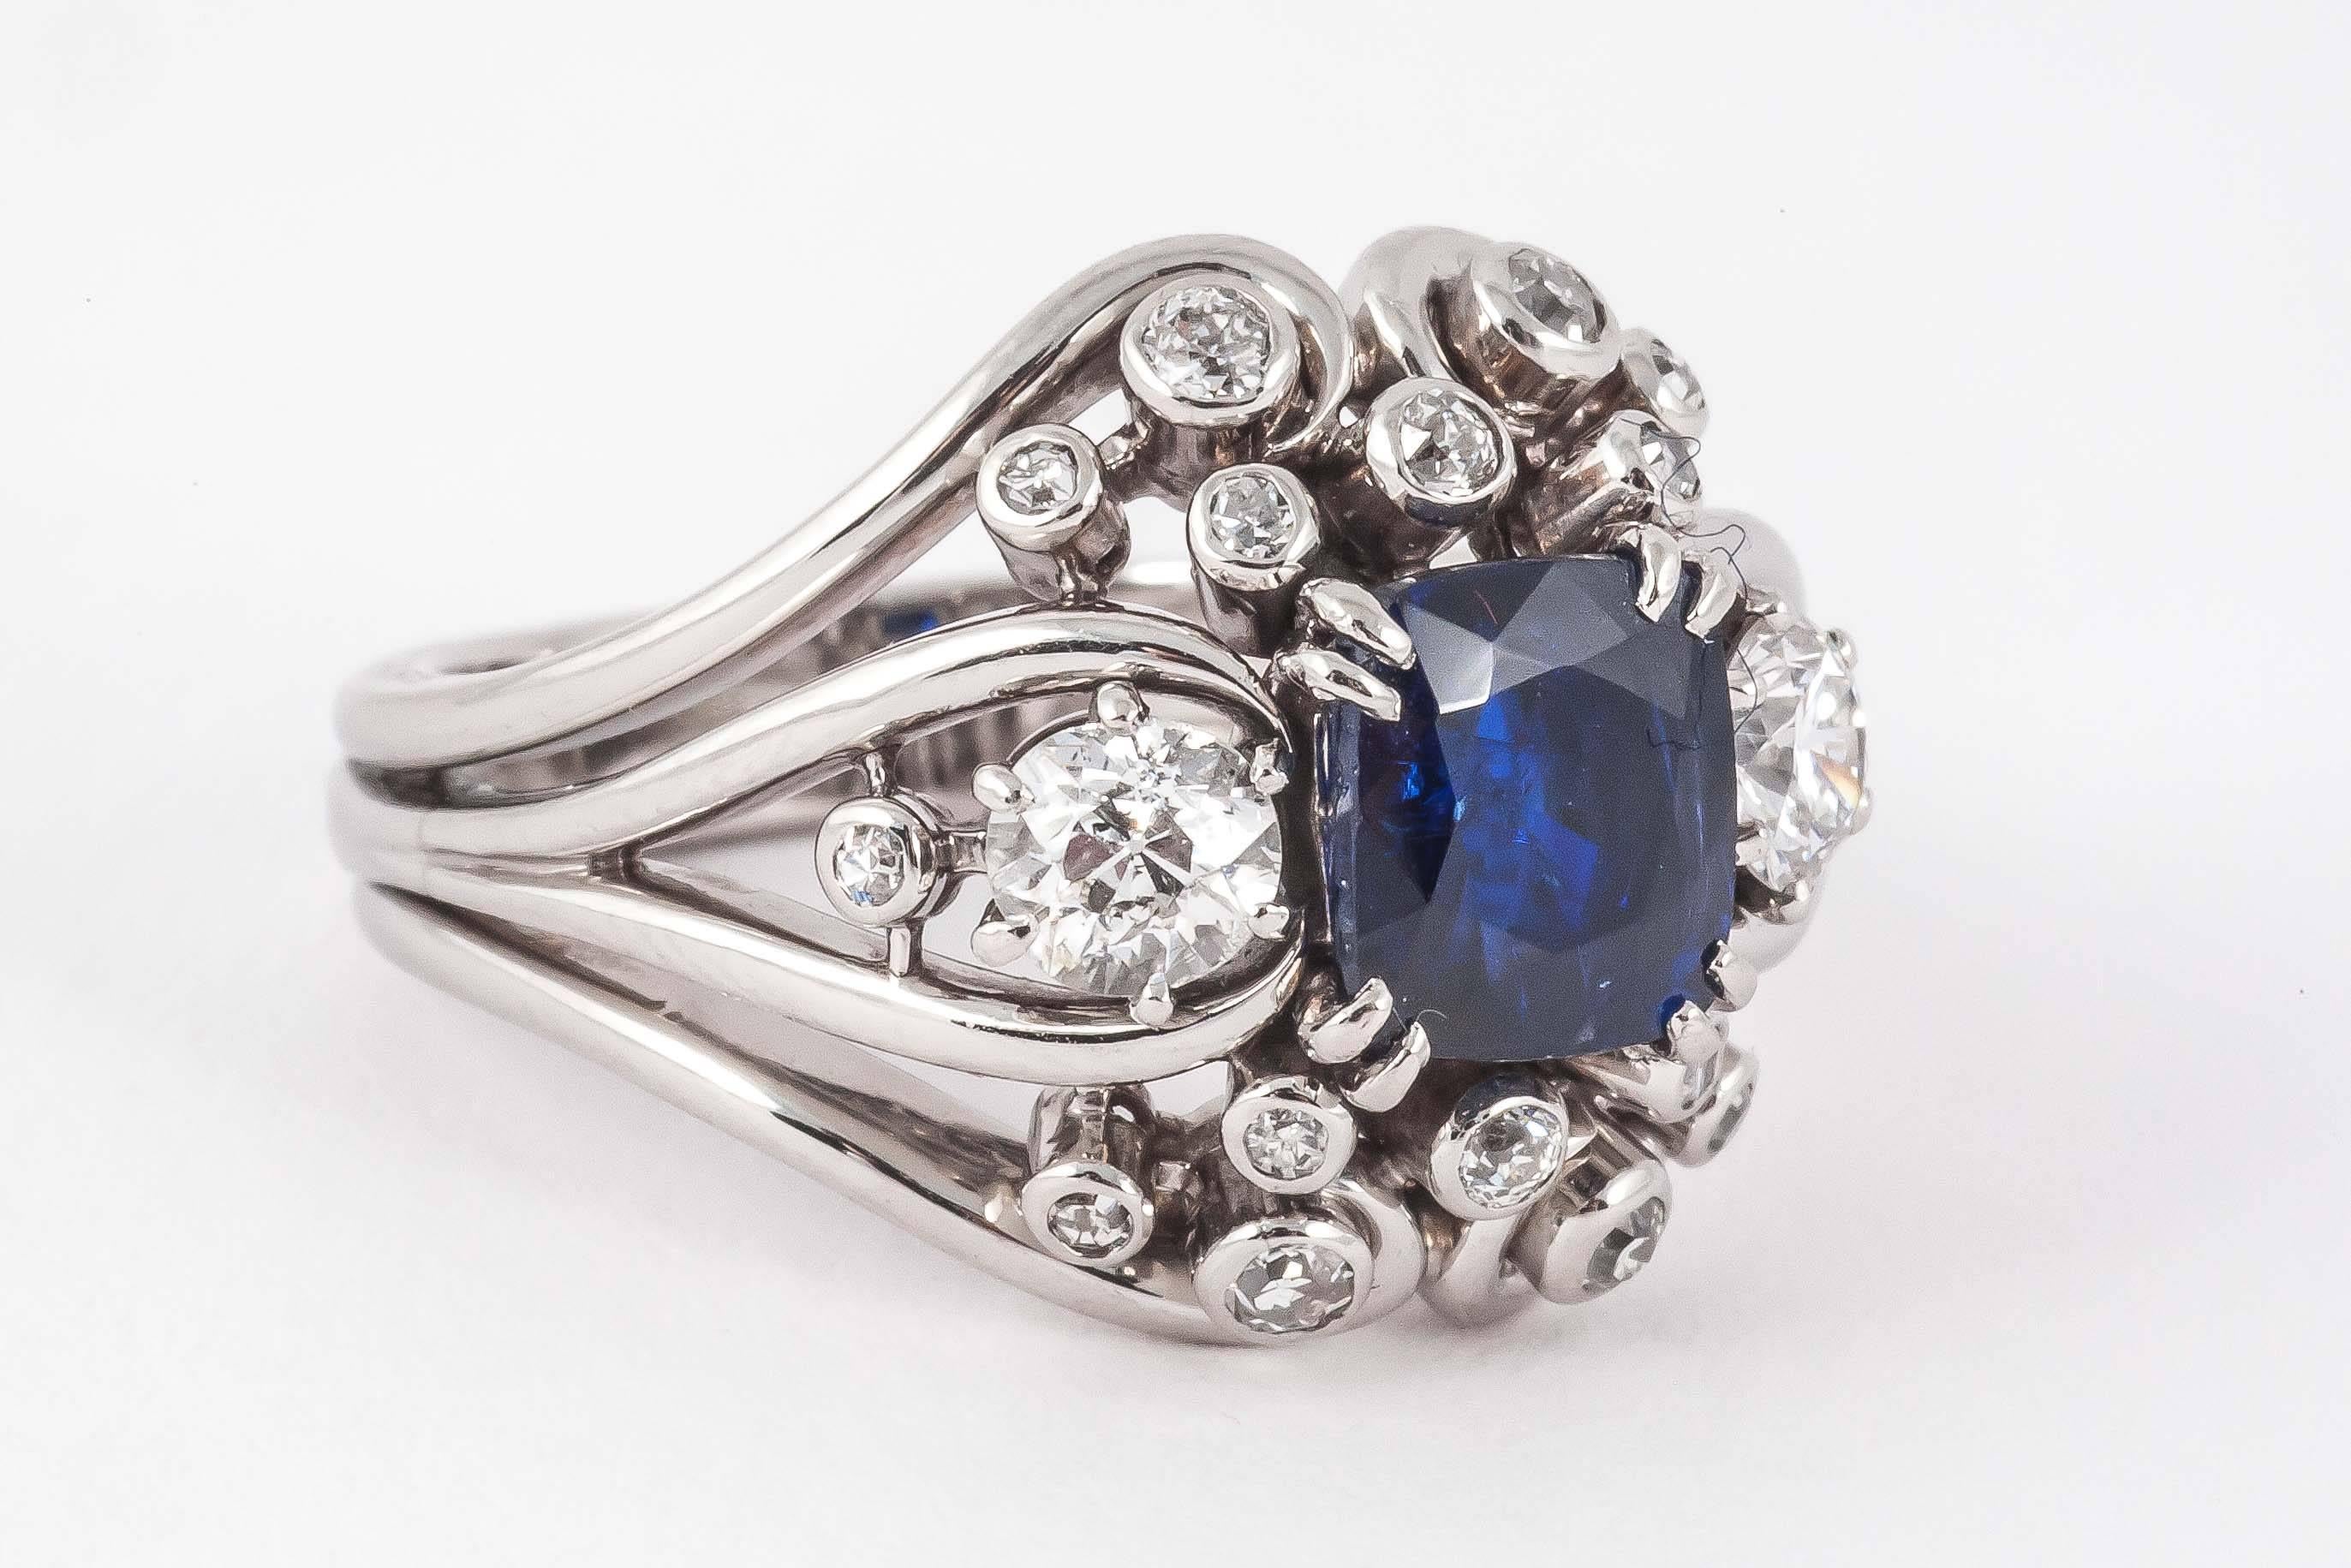 Natural Burma Sapphire surrounded by Diamonds set in Platinum
Ring size K